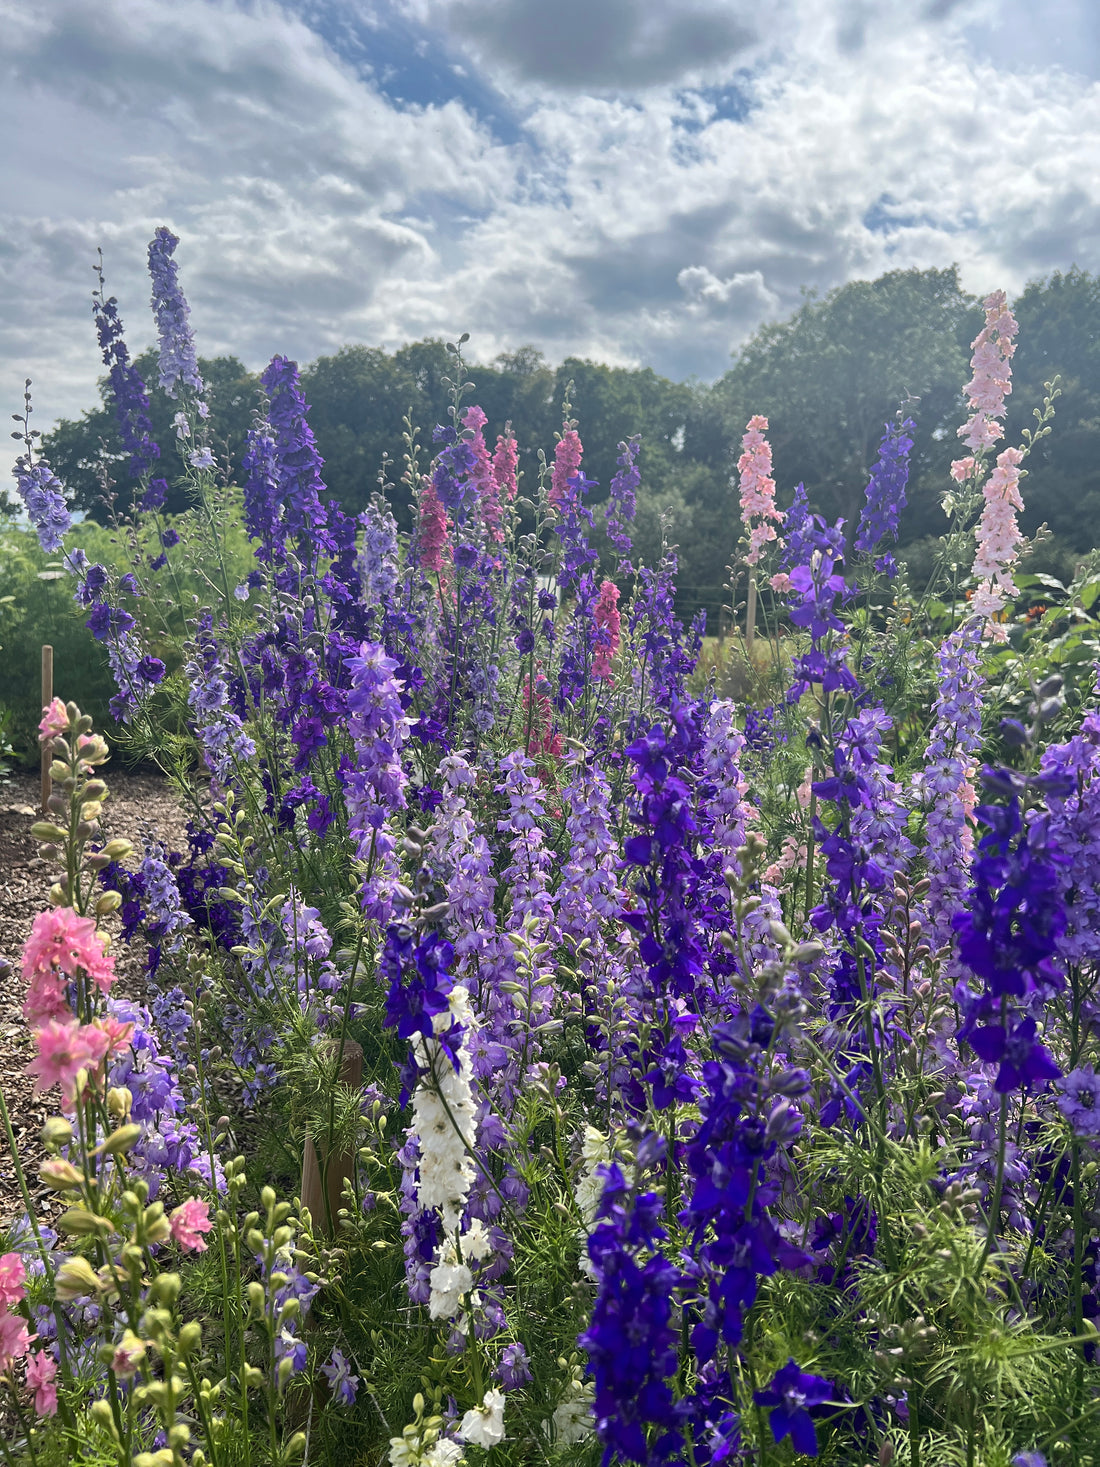 Larkspur Giant Imperial Mix